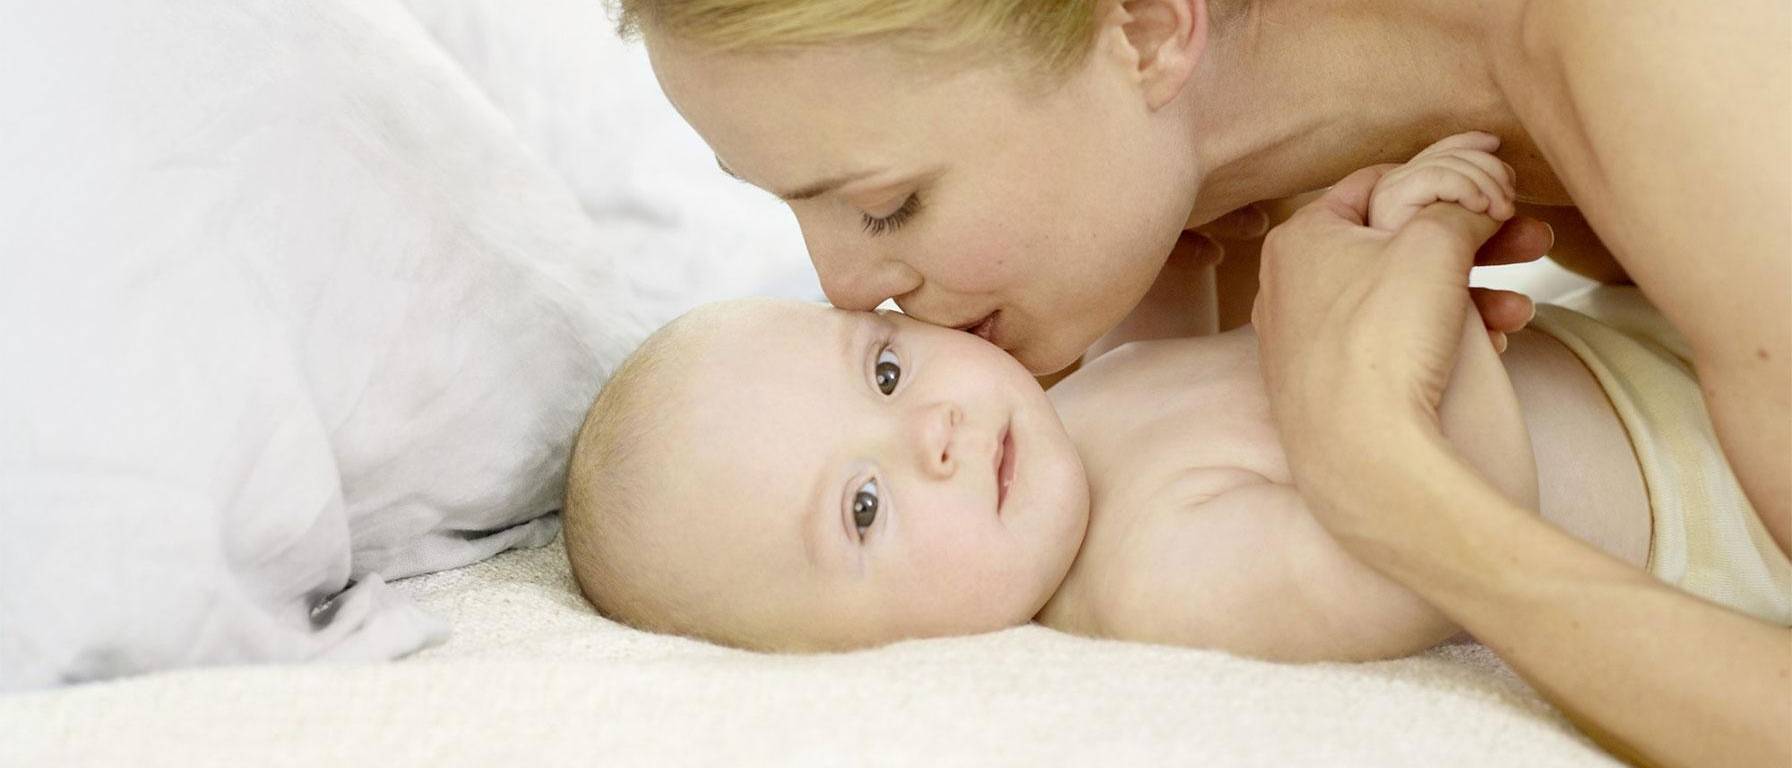 Baby with sensitive skin get kiss from mommy